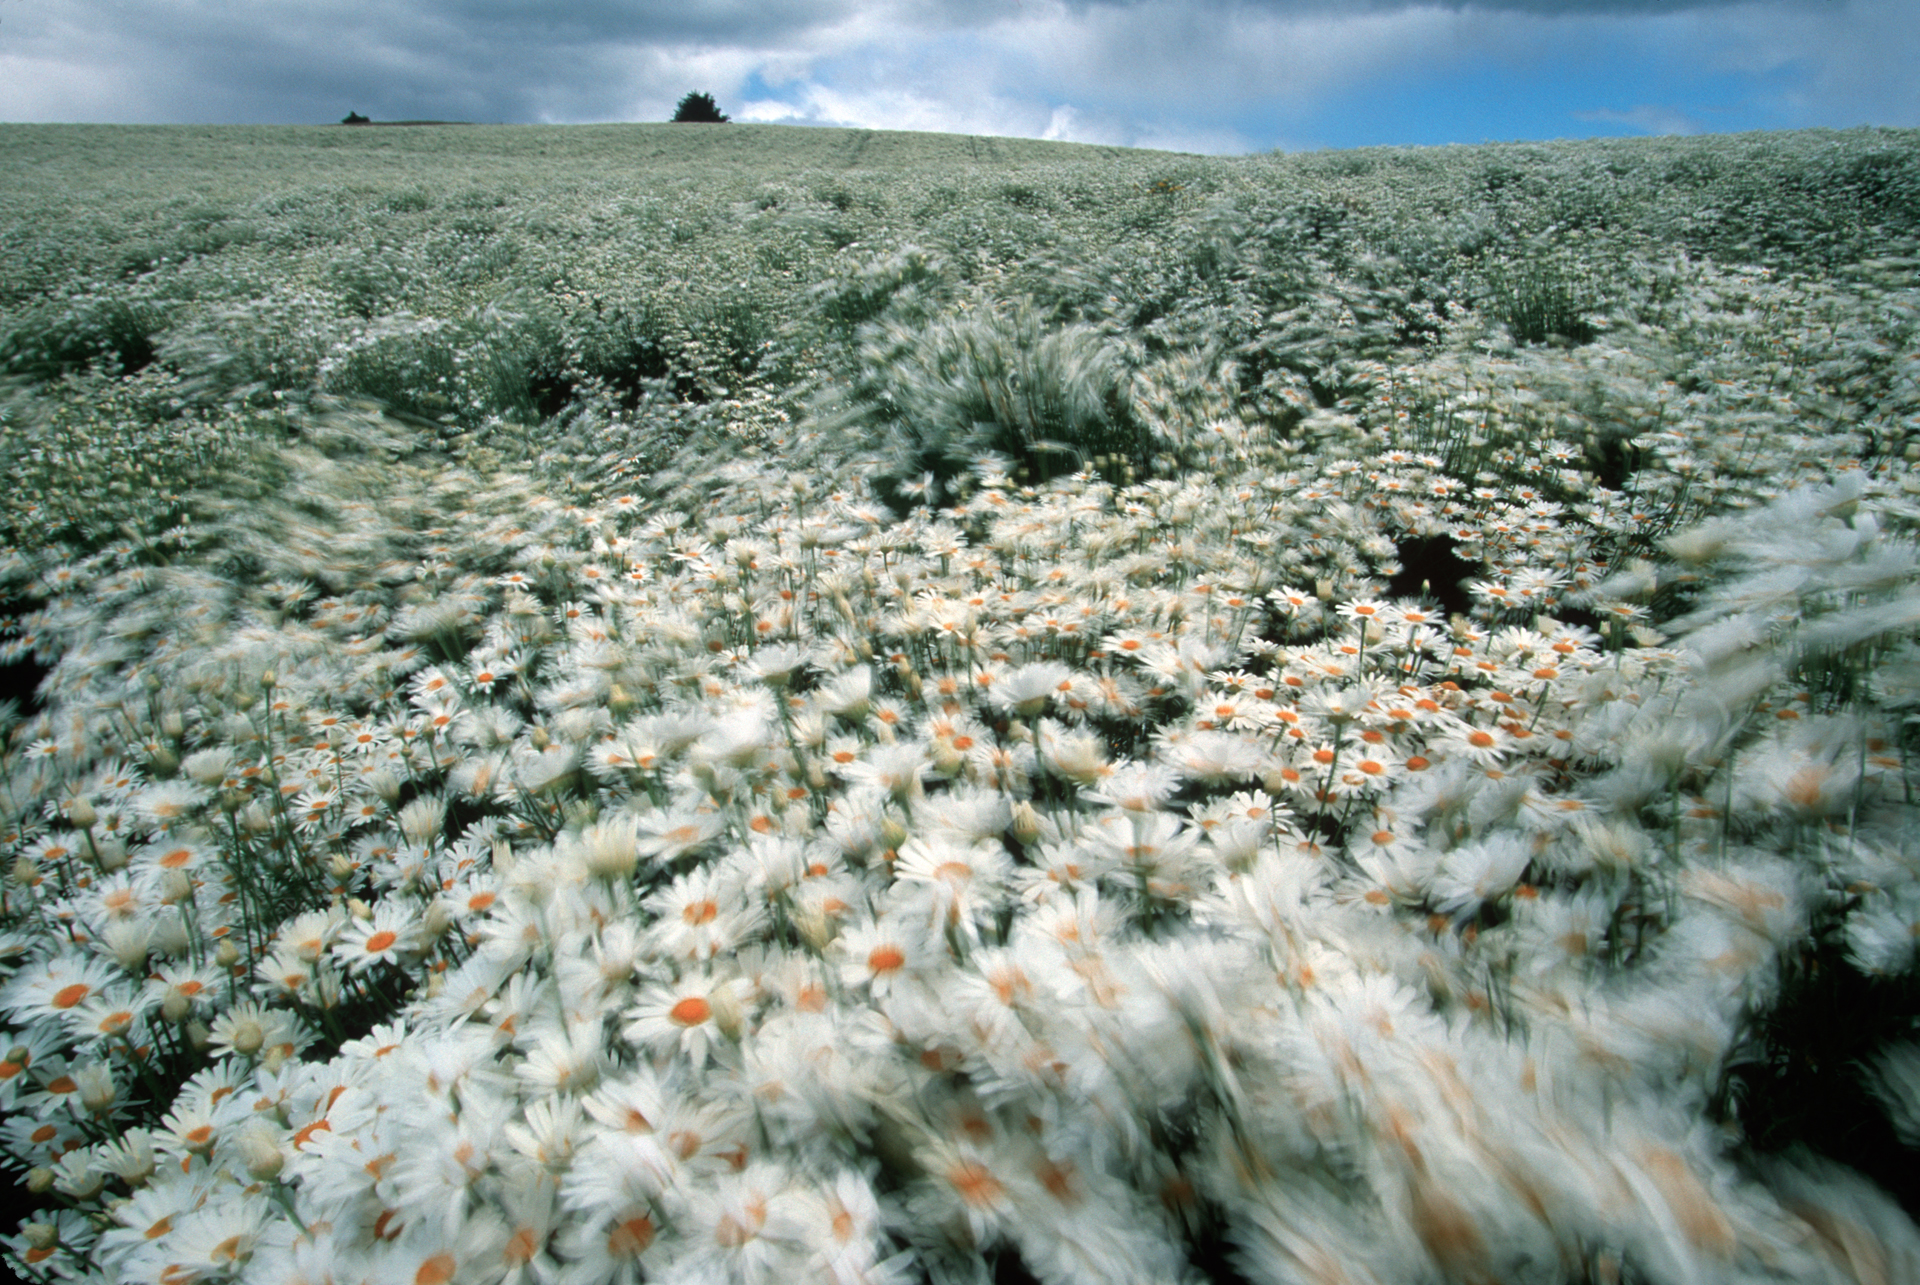  In the agriculture northwest of Tasmania, huge blooming Pyrethra fields carpet hillsides. The pyrethrum or Tanacetum cinerariaefolium is a simple daisy grown for its natural insecticidal oil.  Ulverstone  